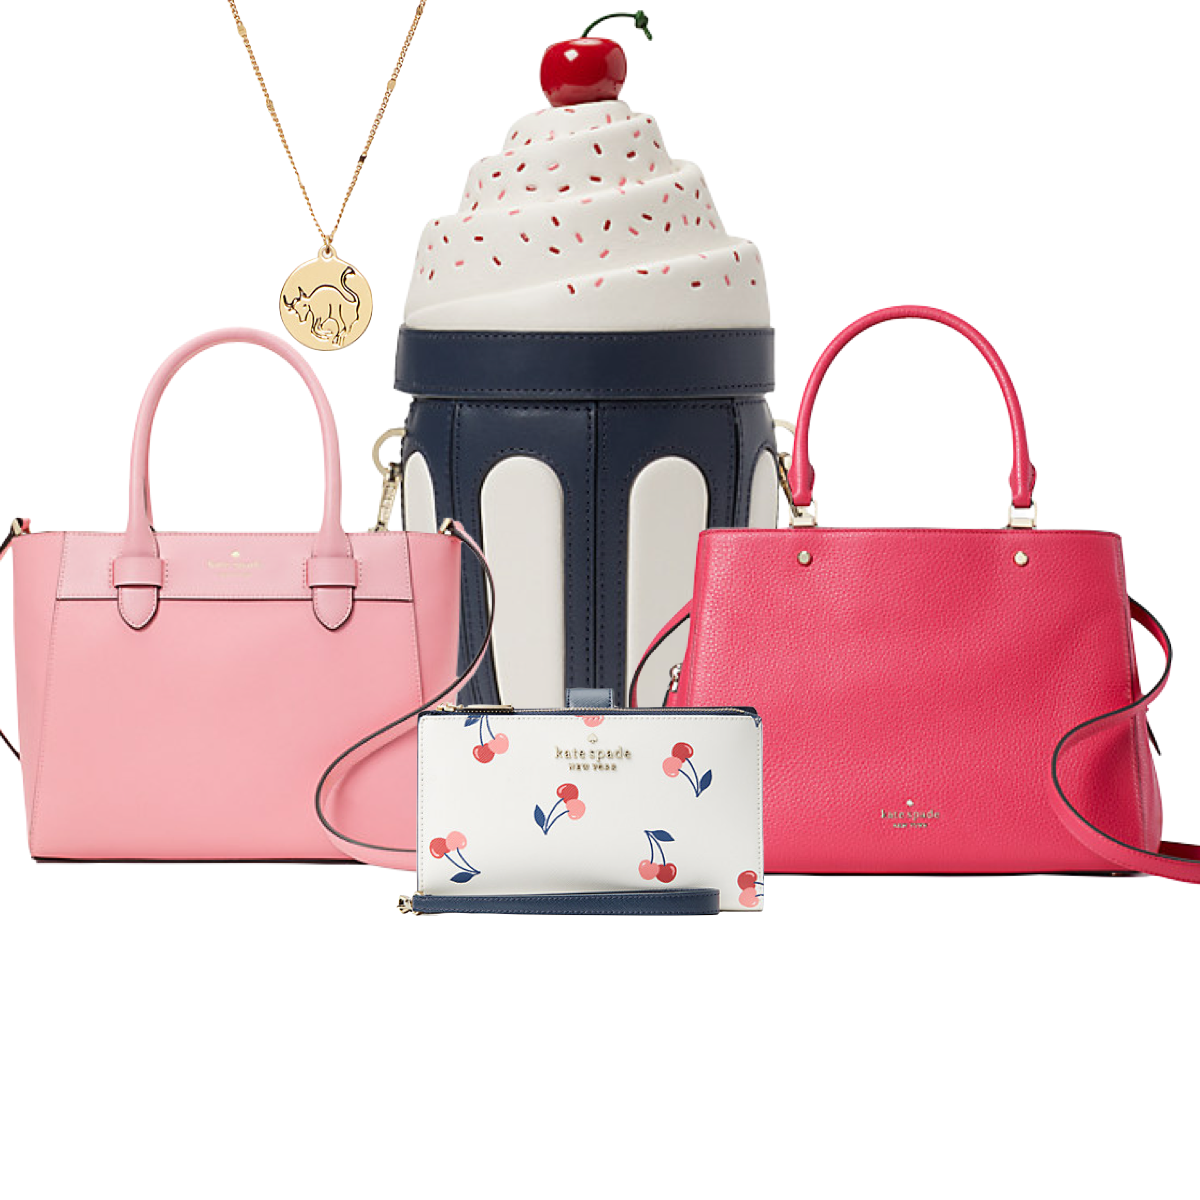 Kate Spade Bags | Kate Spade Backpack | Color: Pink | Size: Os | Stephs1993's Closet